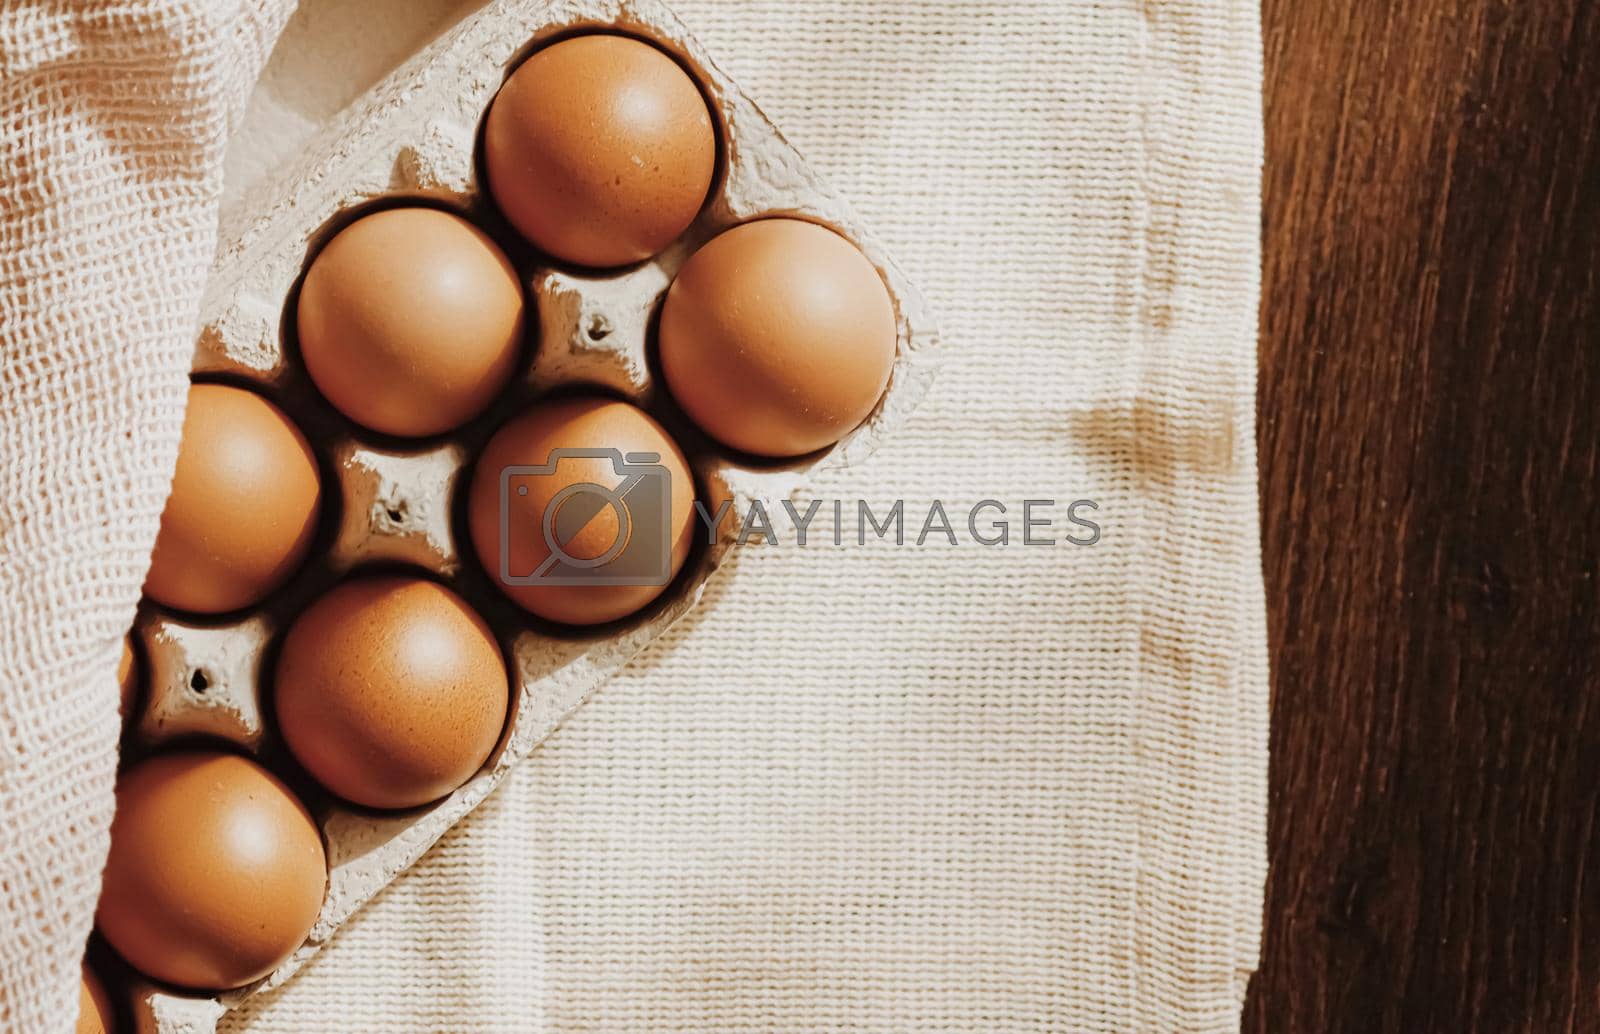 Royalty free image of organic farm eggs in egg box and rustic cloth napkins by Anneleven